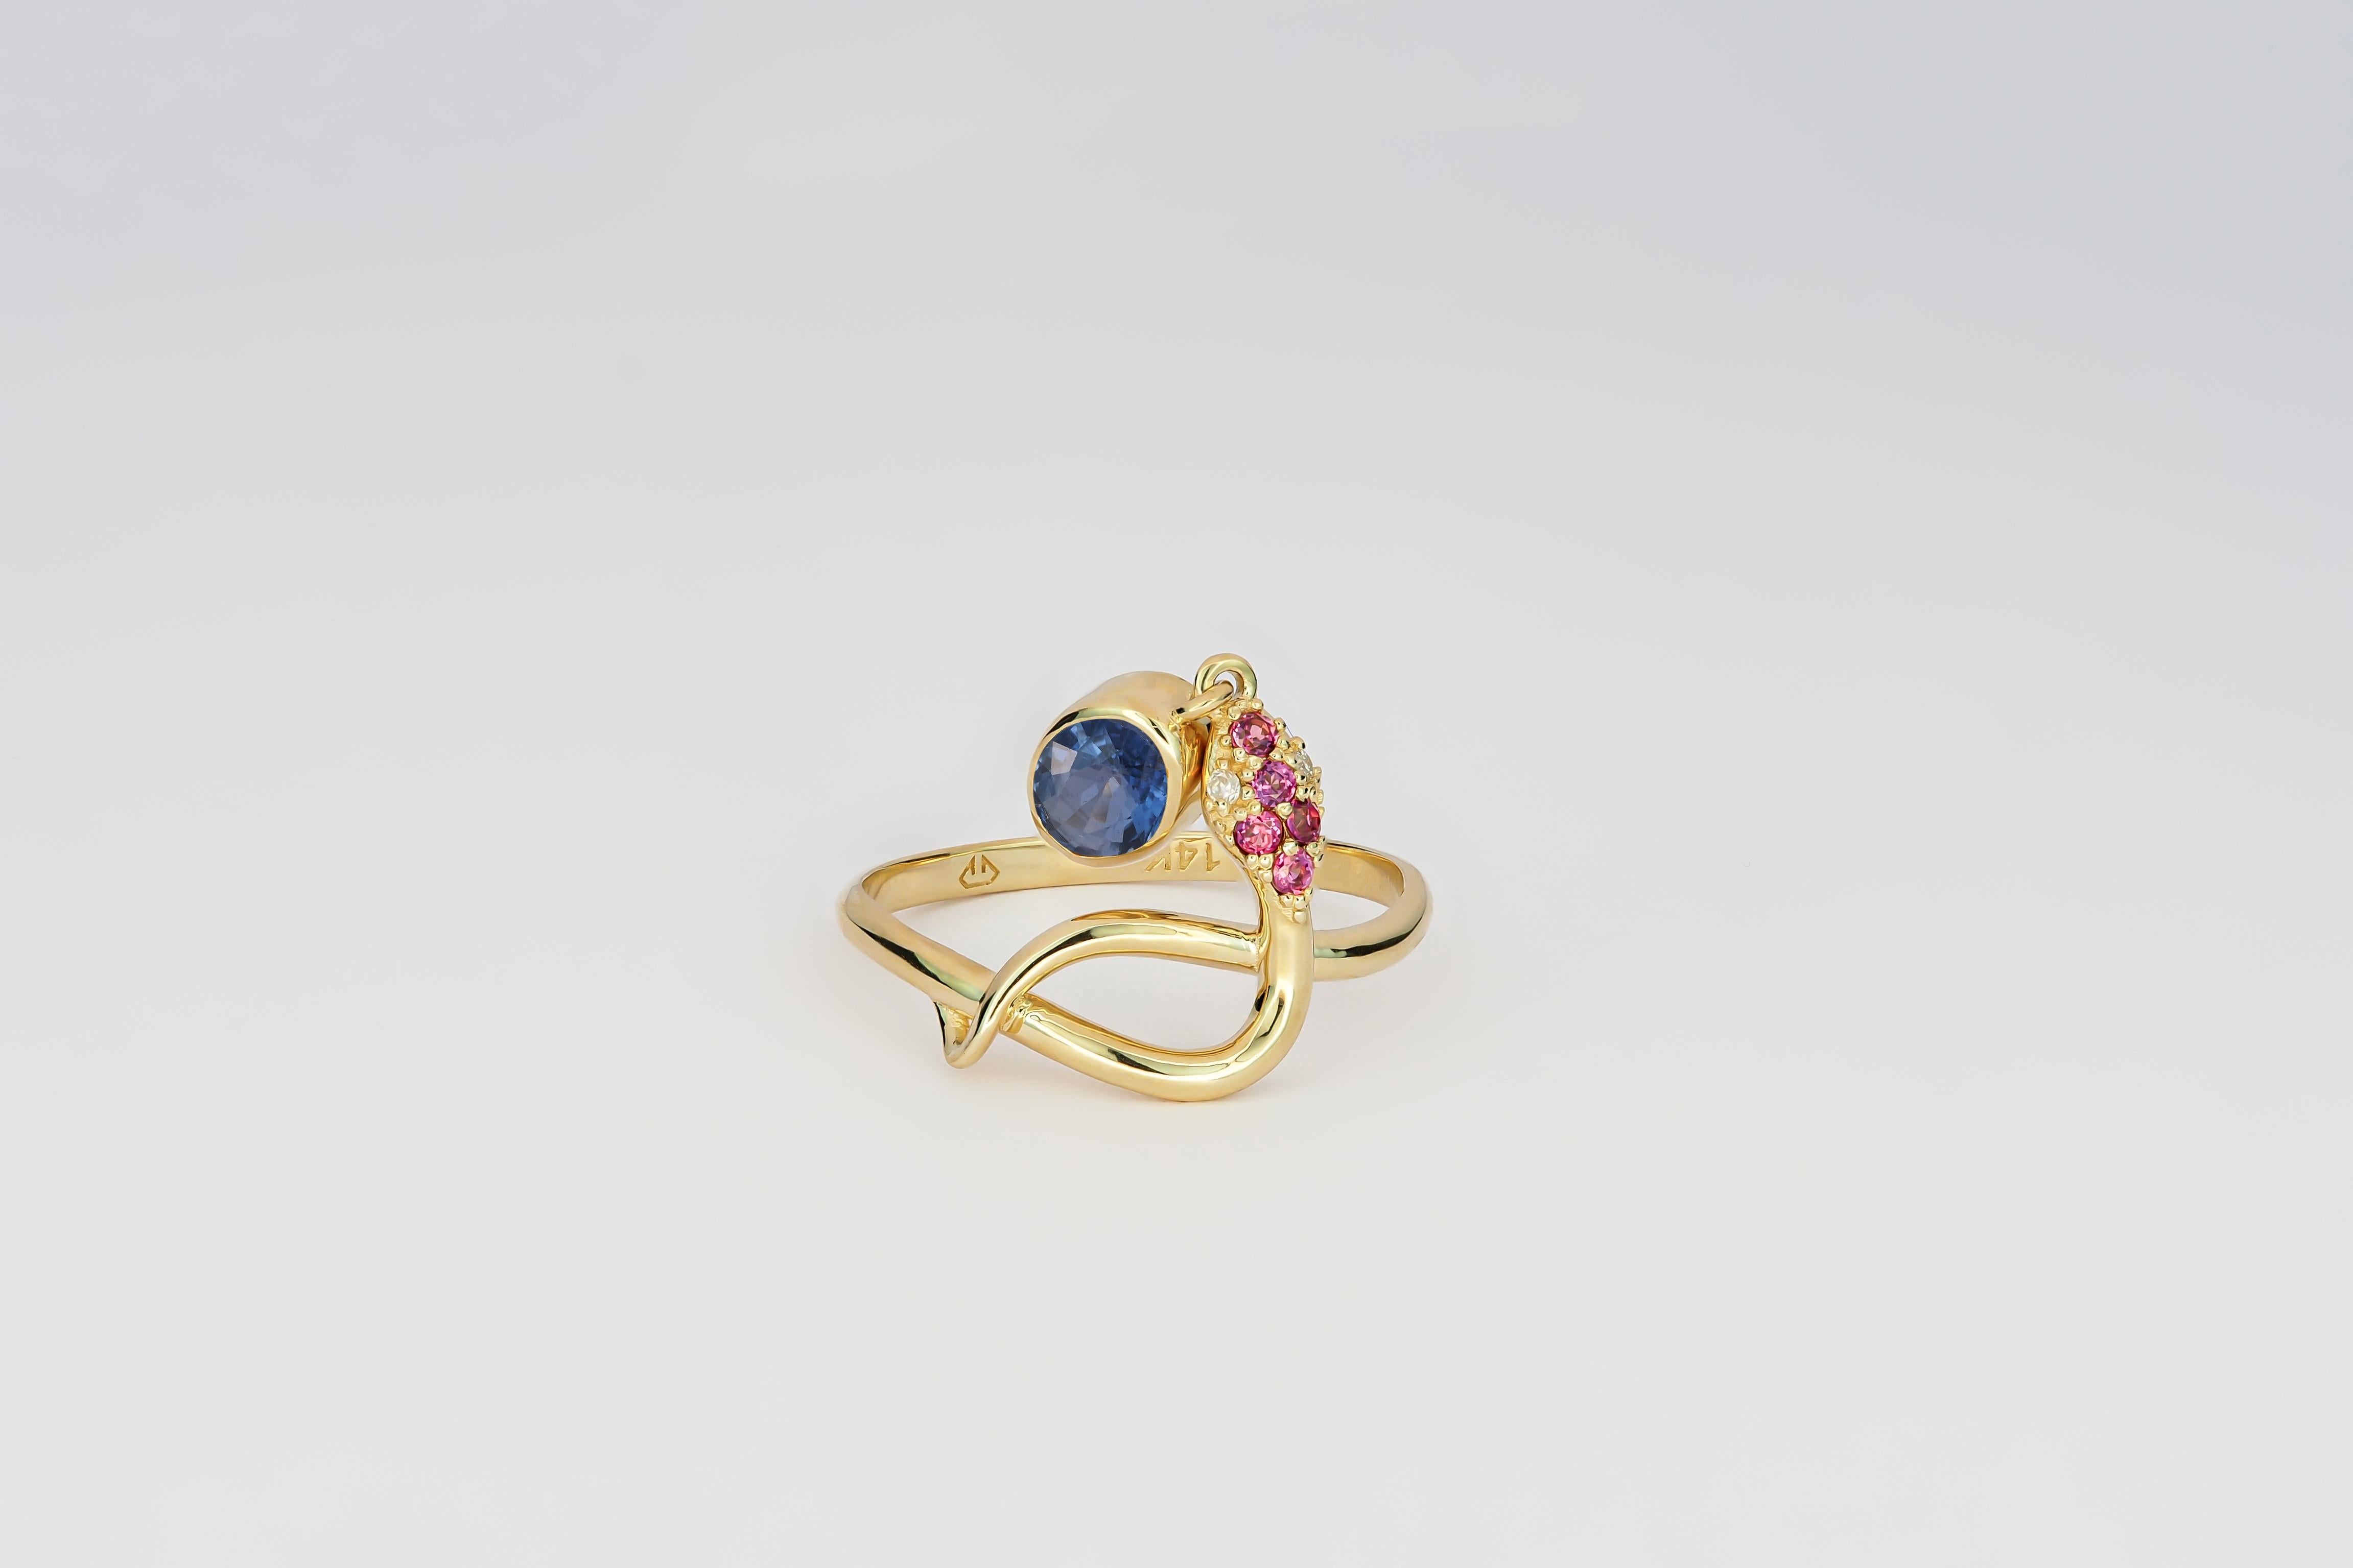 Snake ring with sapphire. Blue sapphire gold ring. Snake gold ring. Genuine sapphire ring. Oval sapphire ring. December birthstone ring. Sapphire vintage ring. 
14k yellow gold ring with blue sapphire, rose sapphires and diamonds. 

Metal: 14k